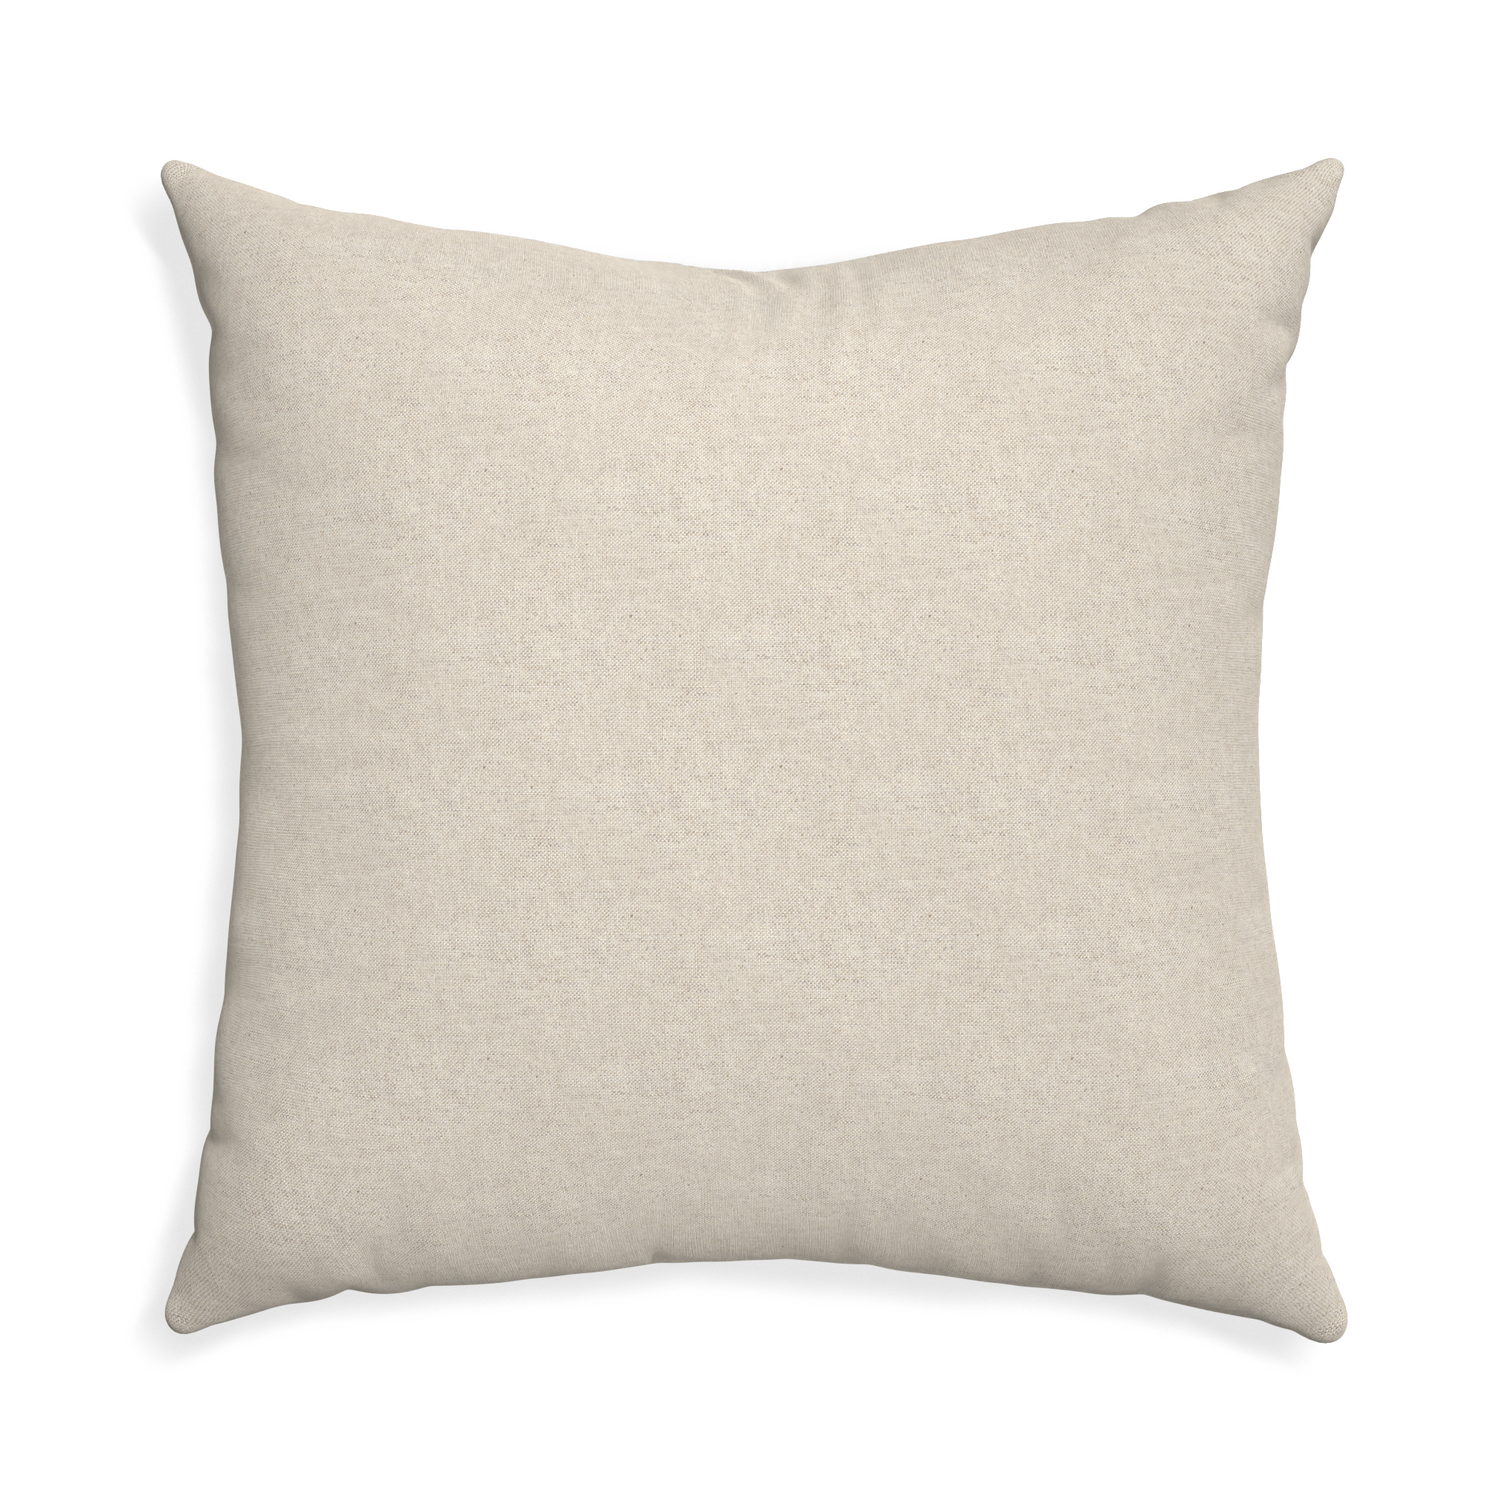 Euro-sham oat custom light brownpillow with none on white background